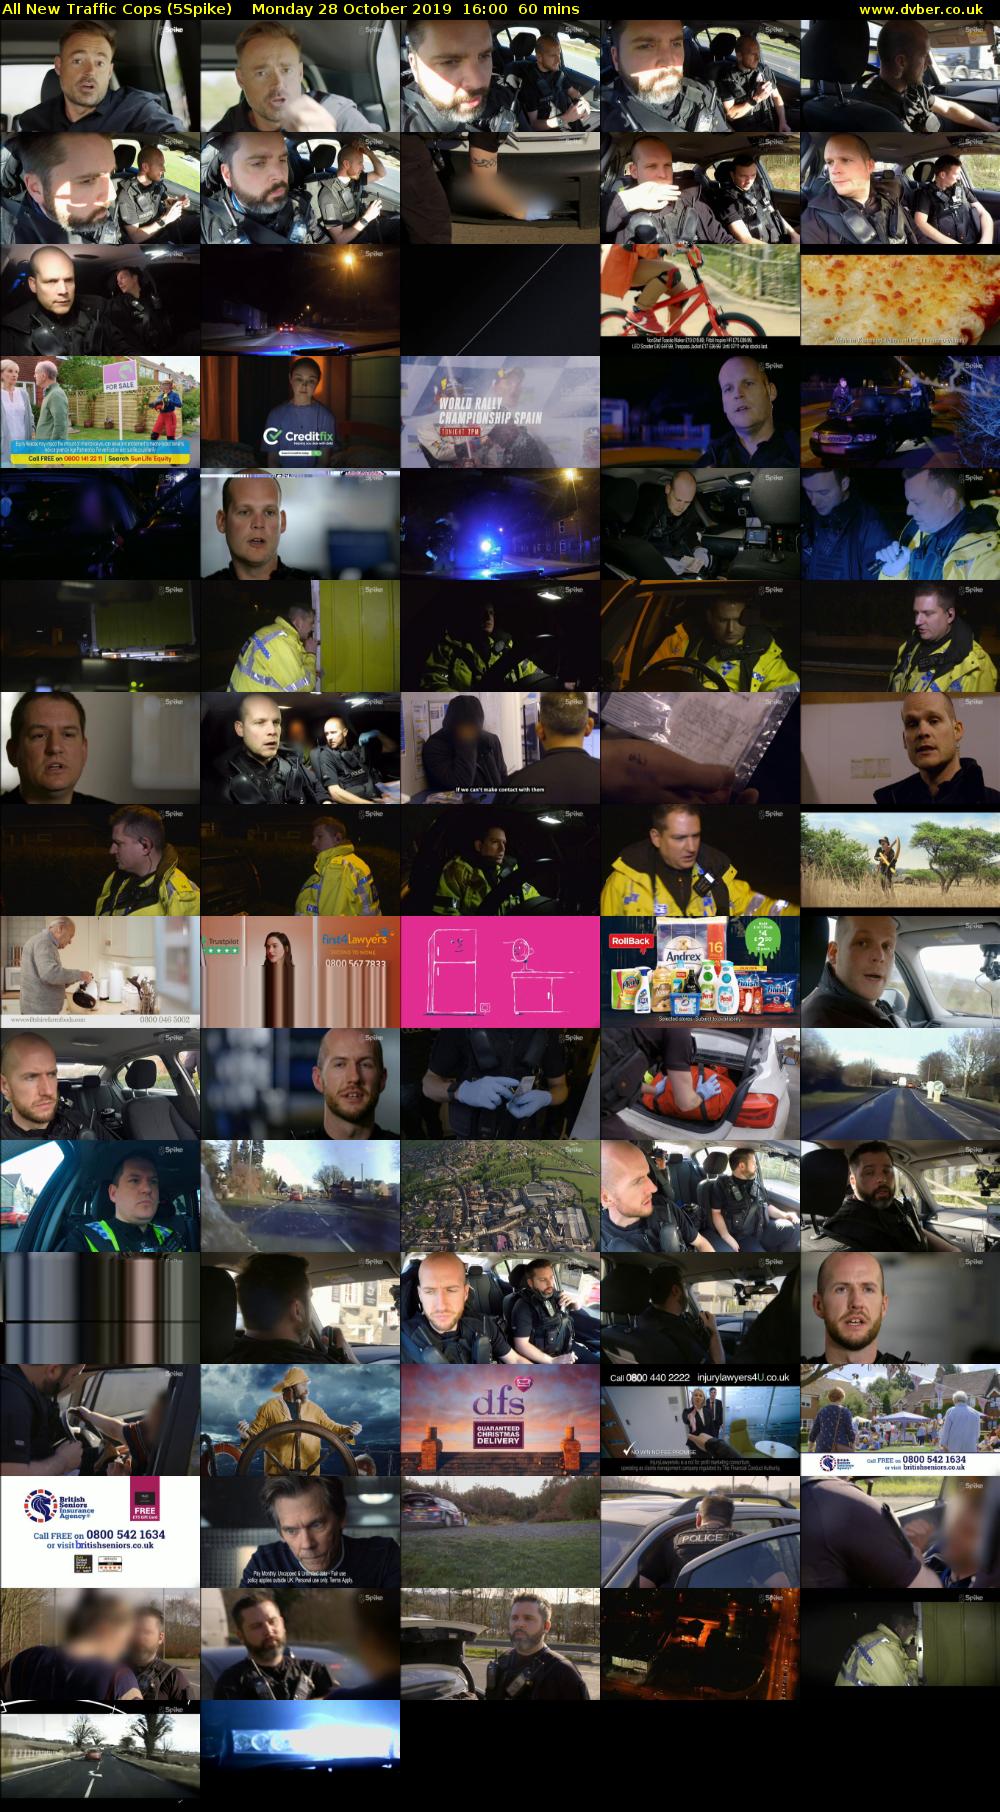 All New Traffic Cops (5Spike) Monday 28 October 2019 16:00 - 17:00